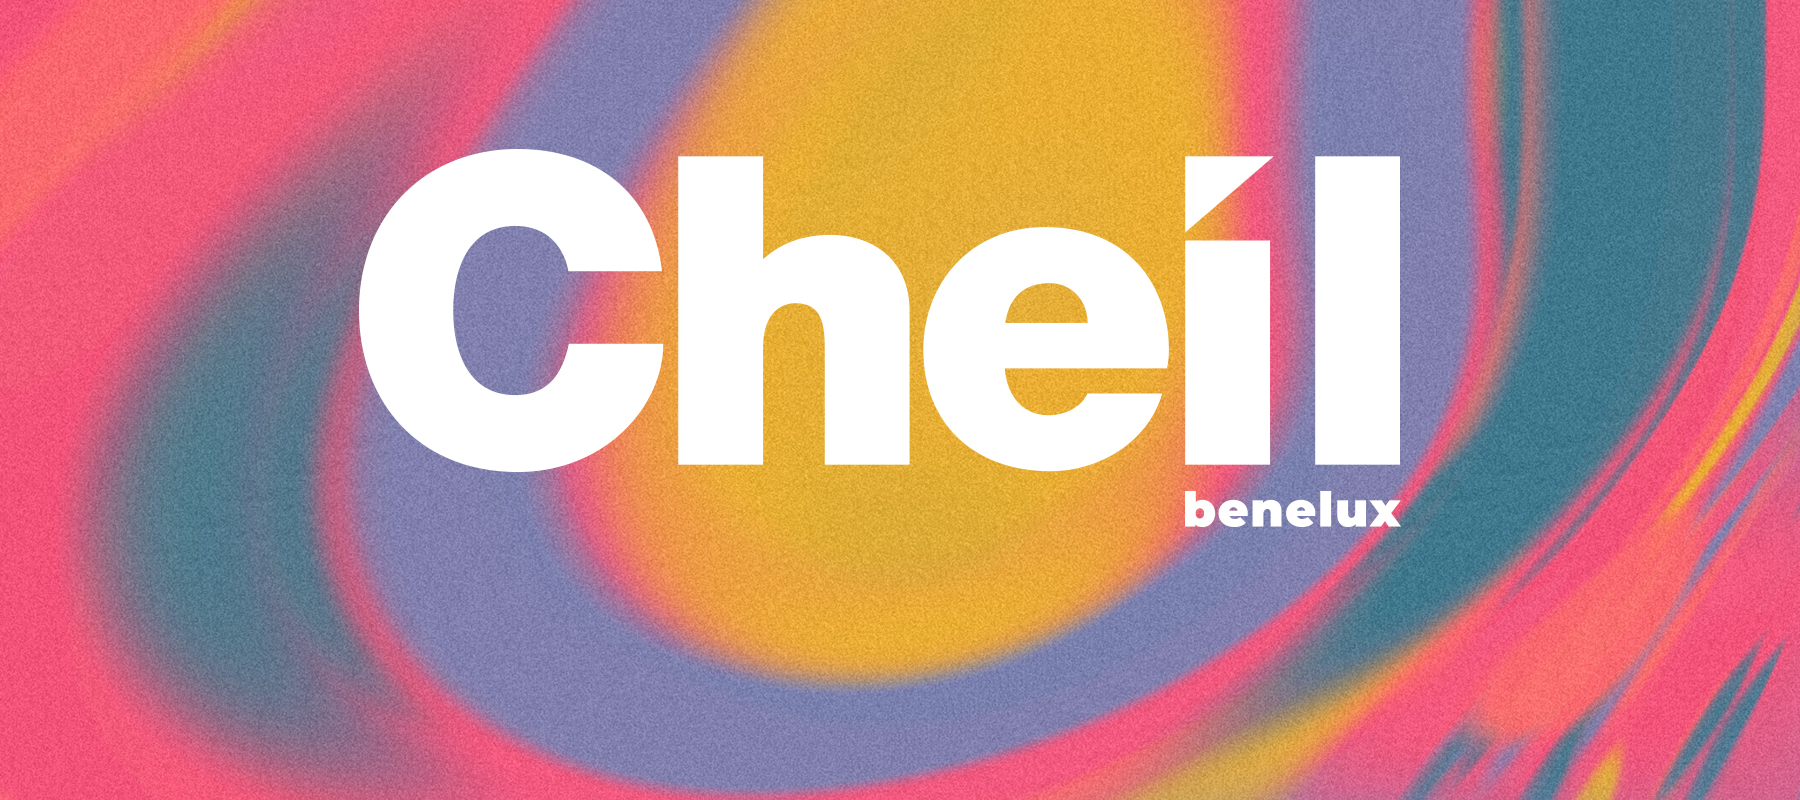 [Vacancy] Cheil Benelux has a position for Retail Communications Manager (Brussels)